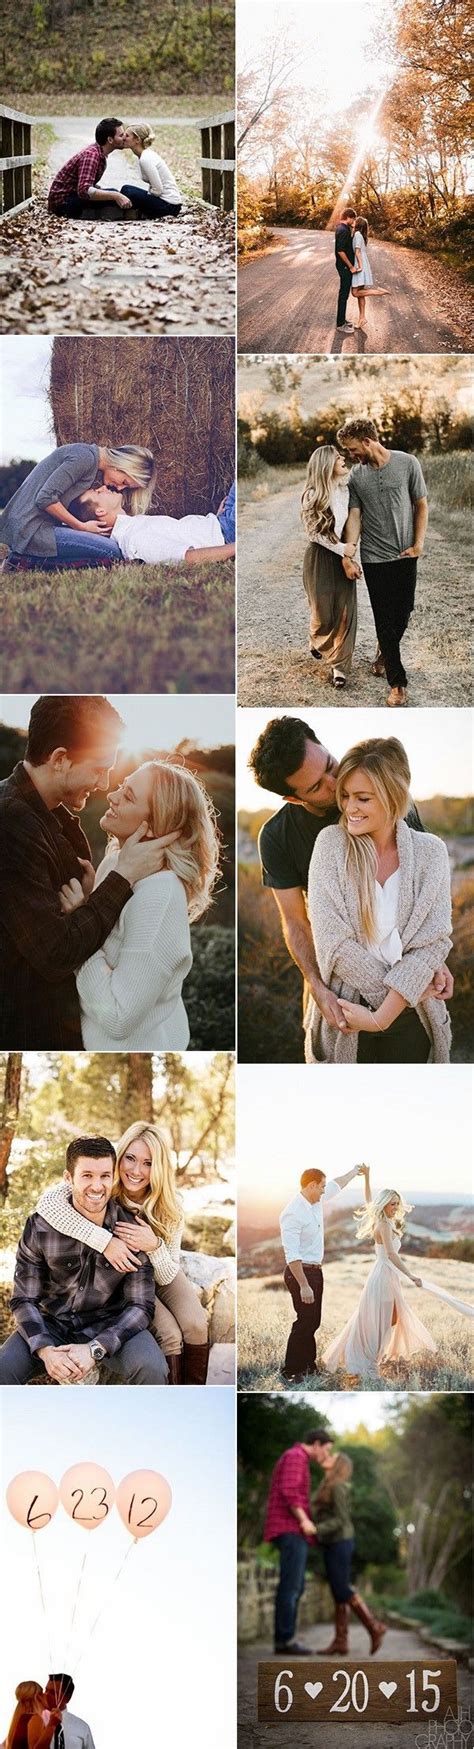 Top 20 Engagement Photo Ideas To Love Emma Loves Weddings